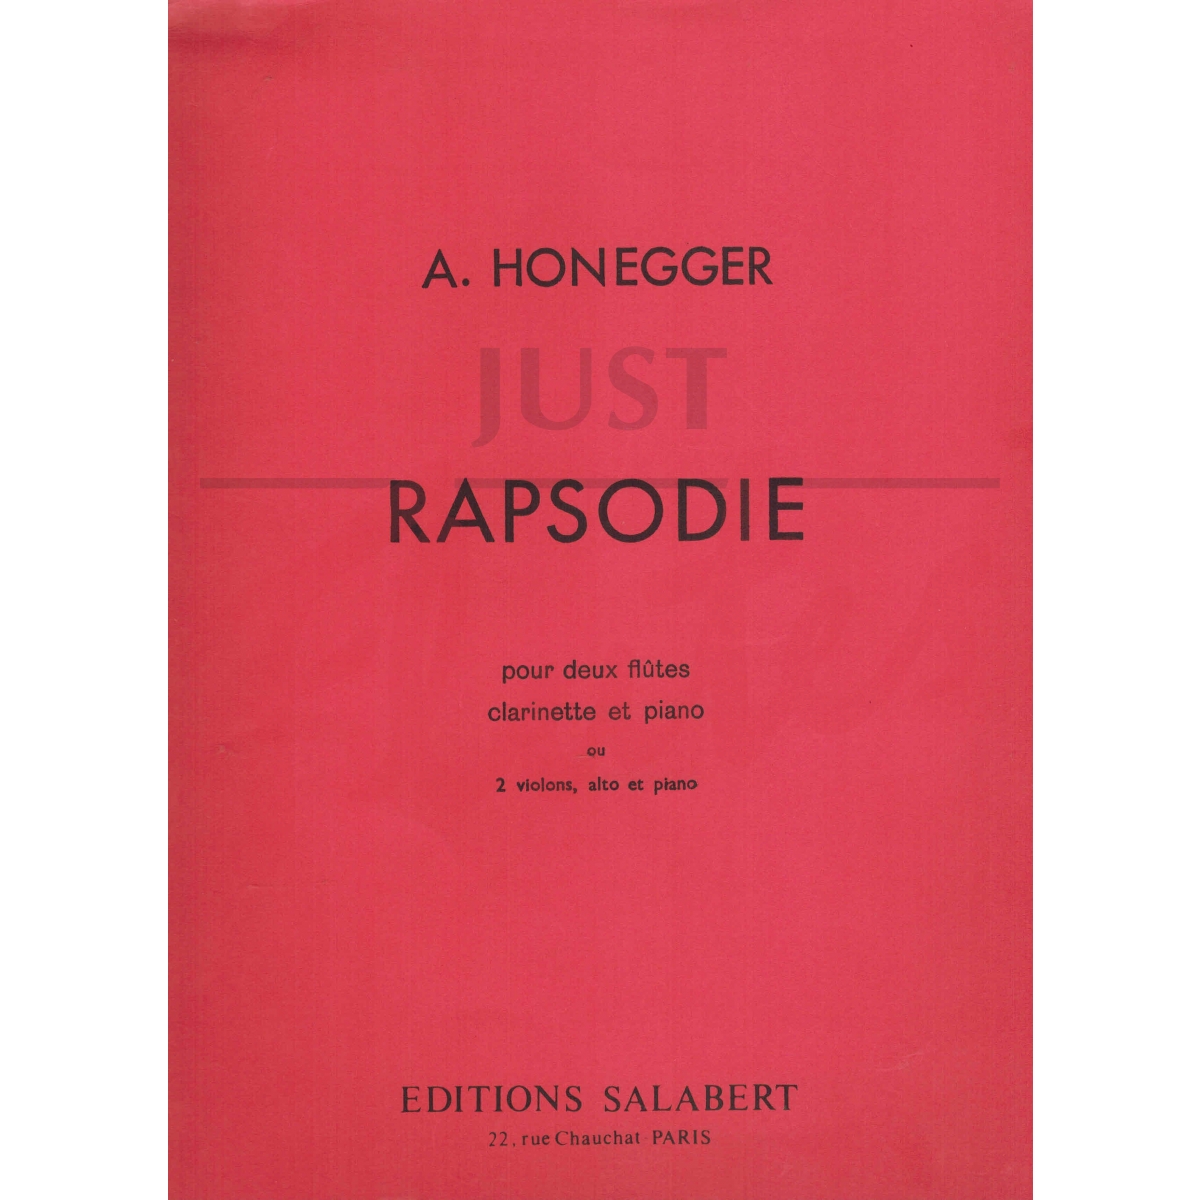 Rapsodie for 2 flutes, clarinet and piano